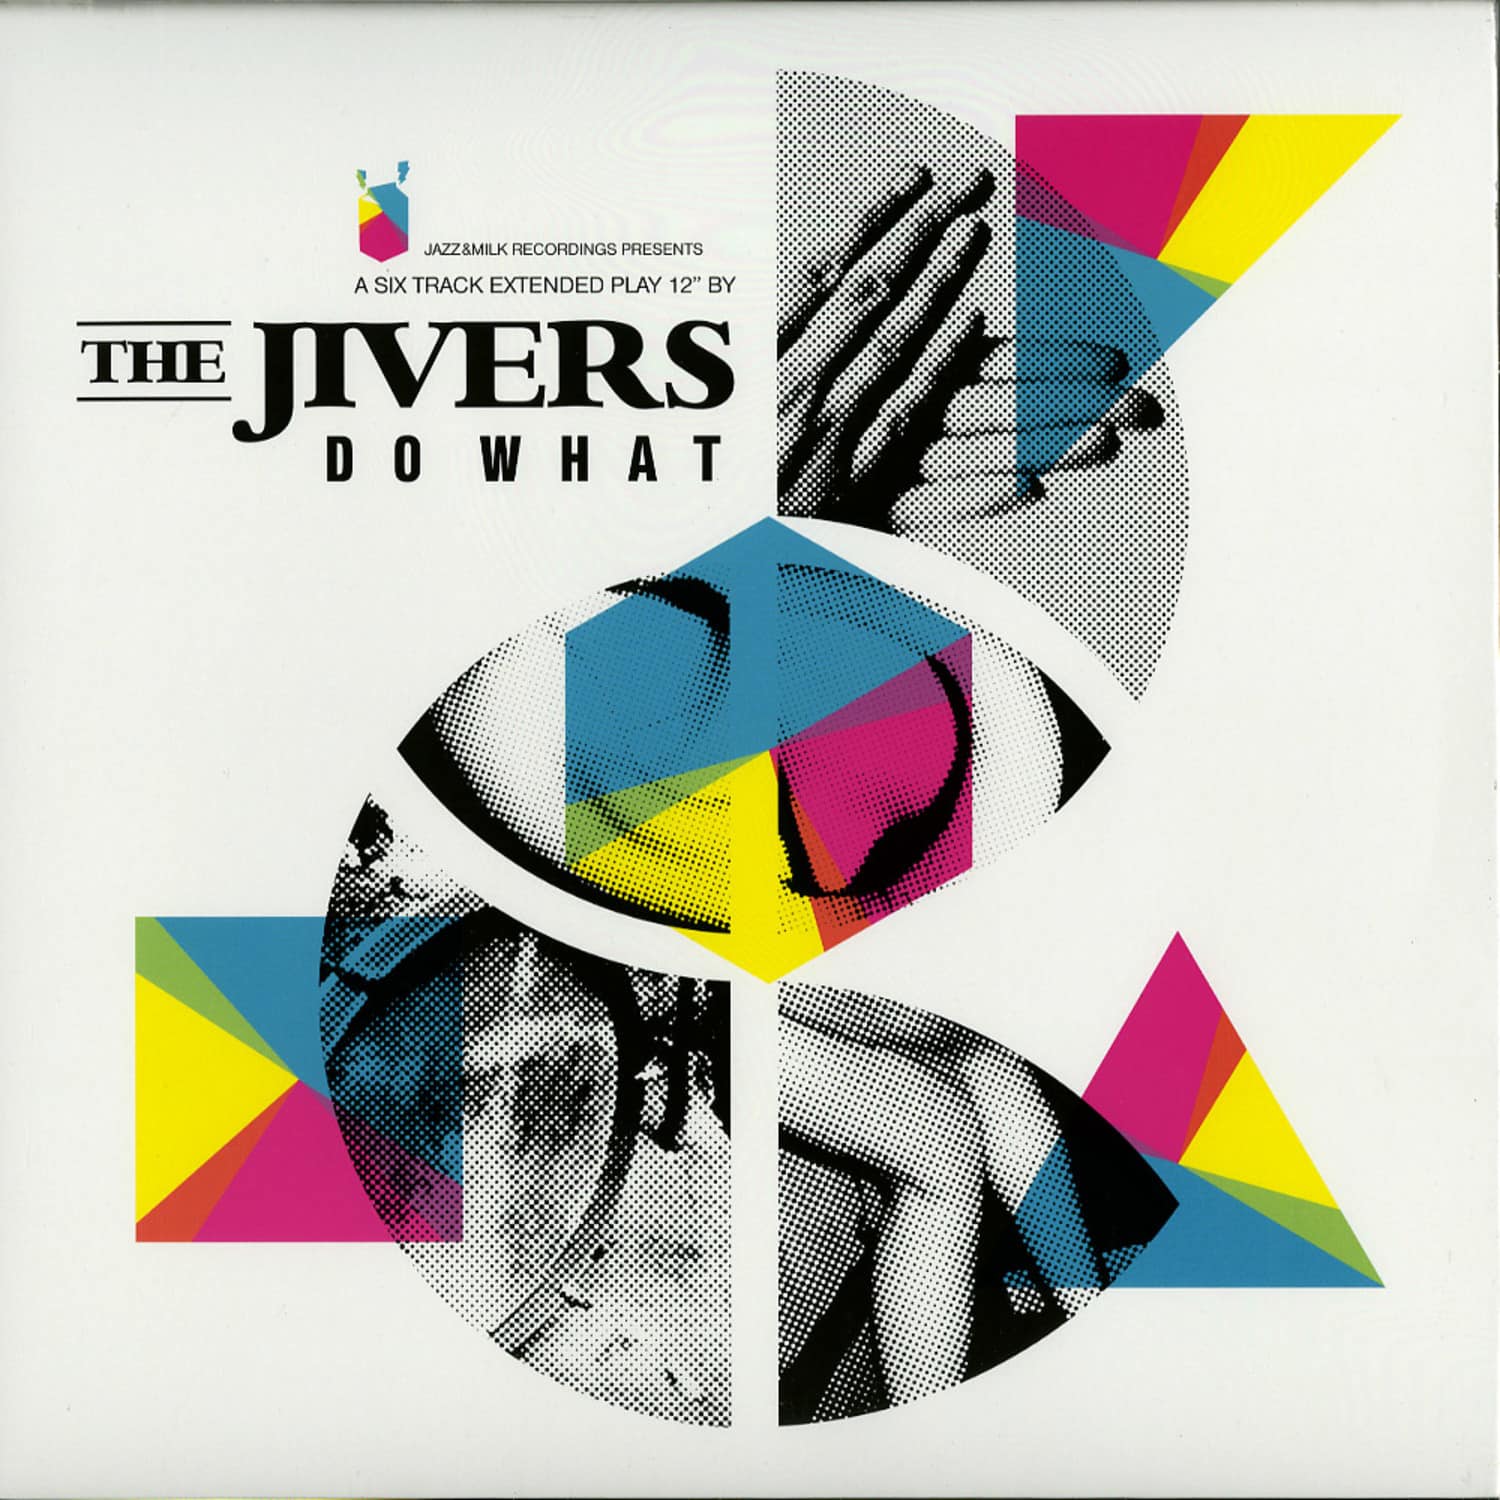 The Jivers - DO WHAT EP